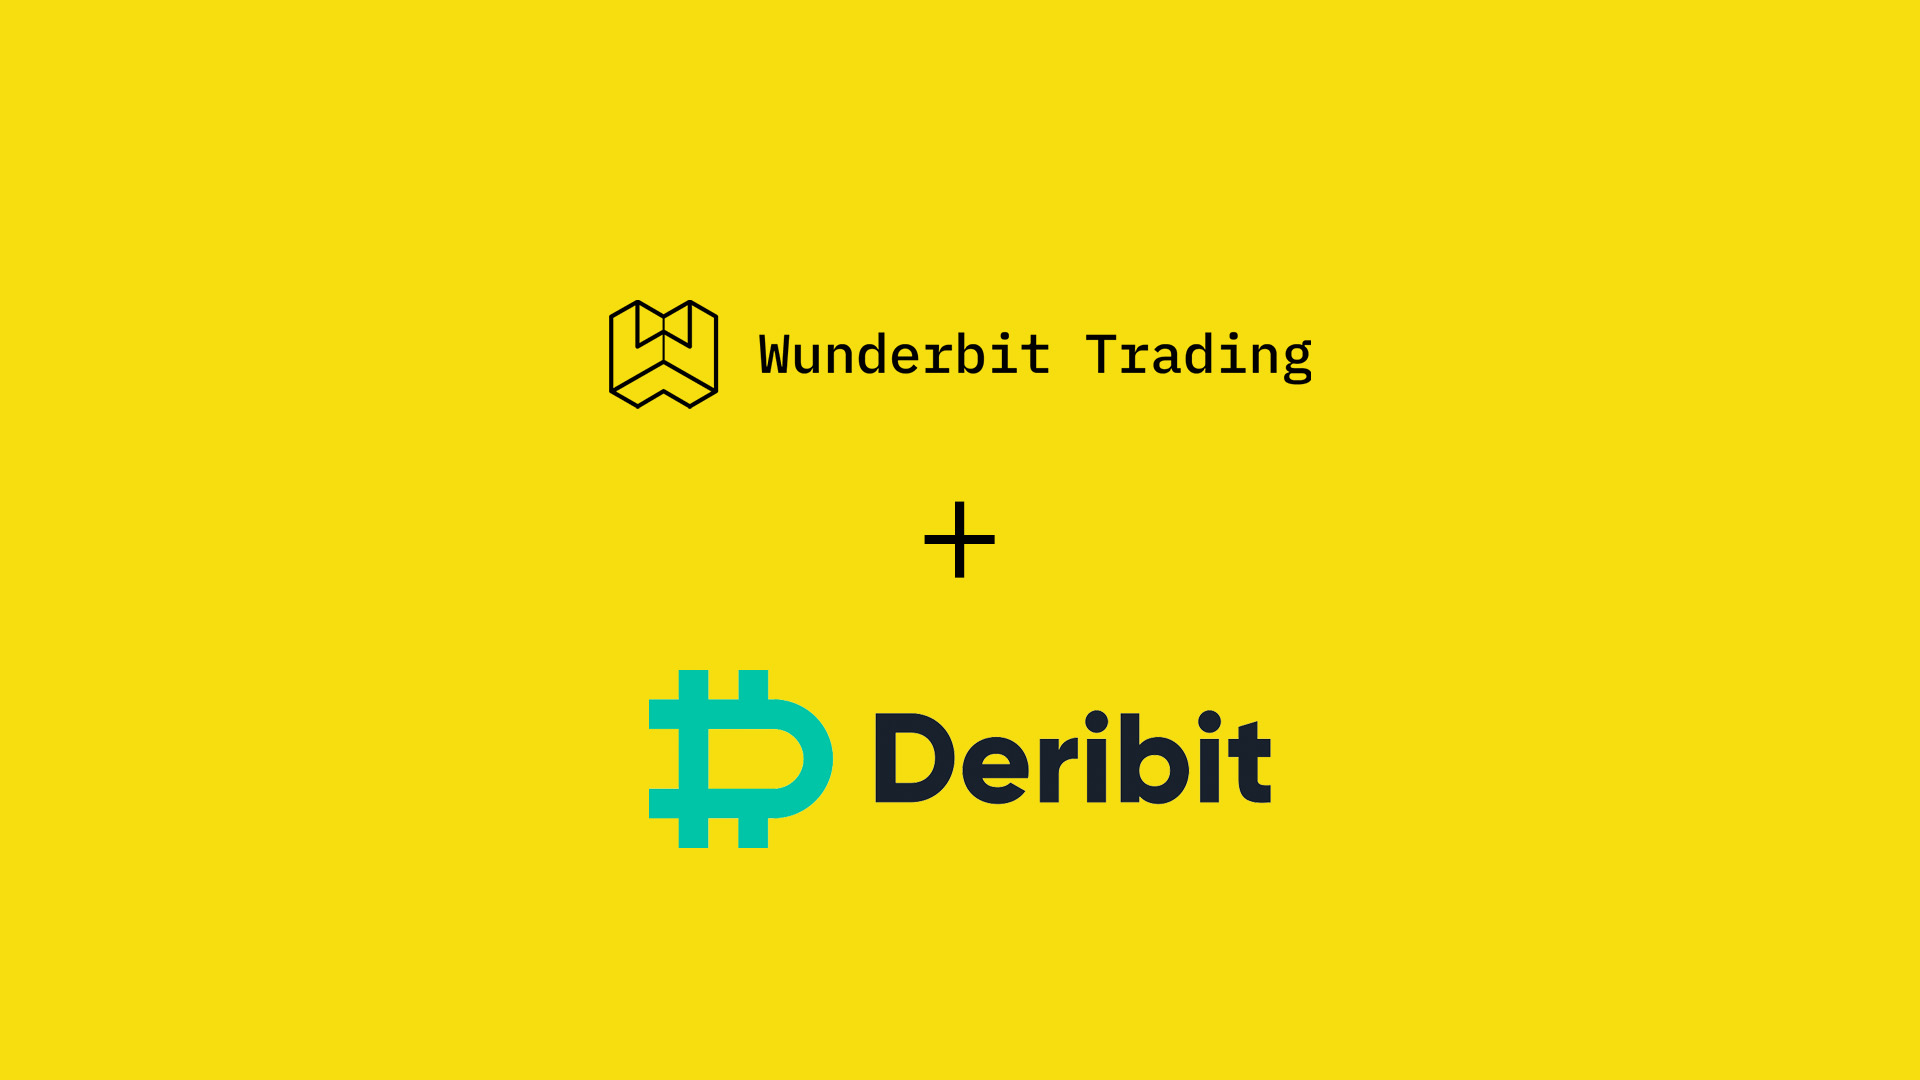 Deribit users can now copy trade and use TradingView bots